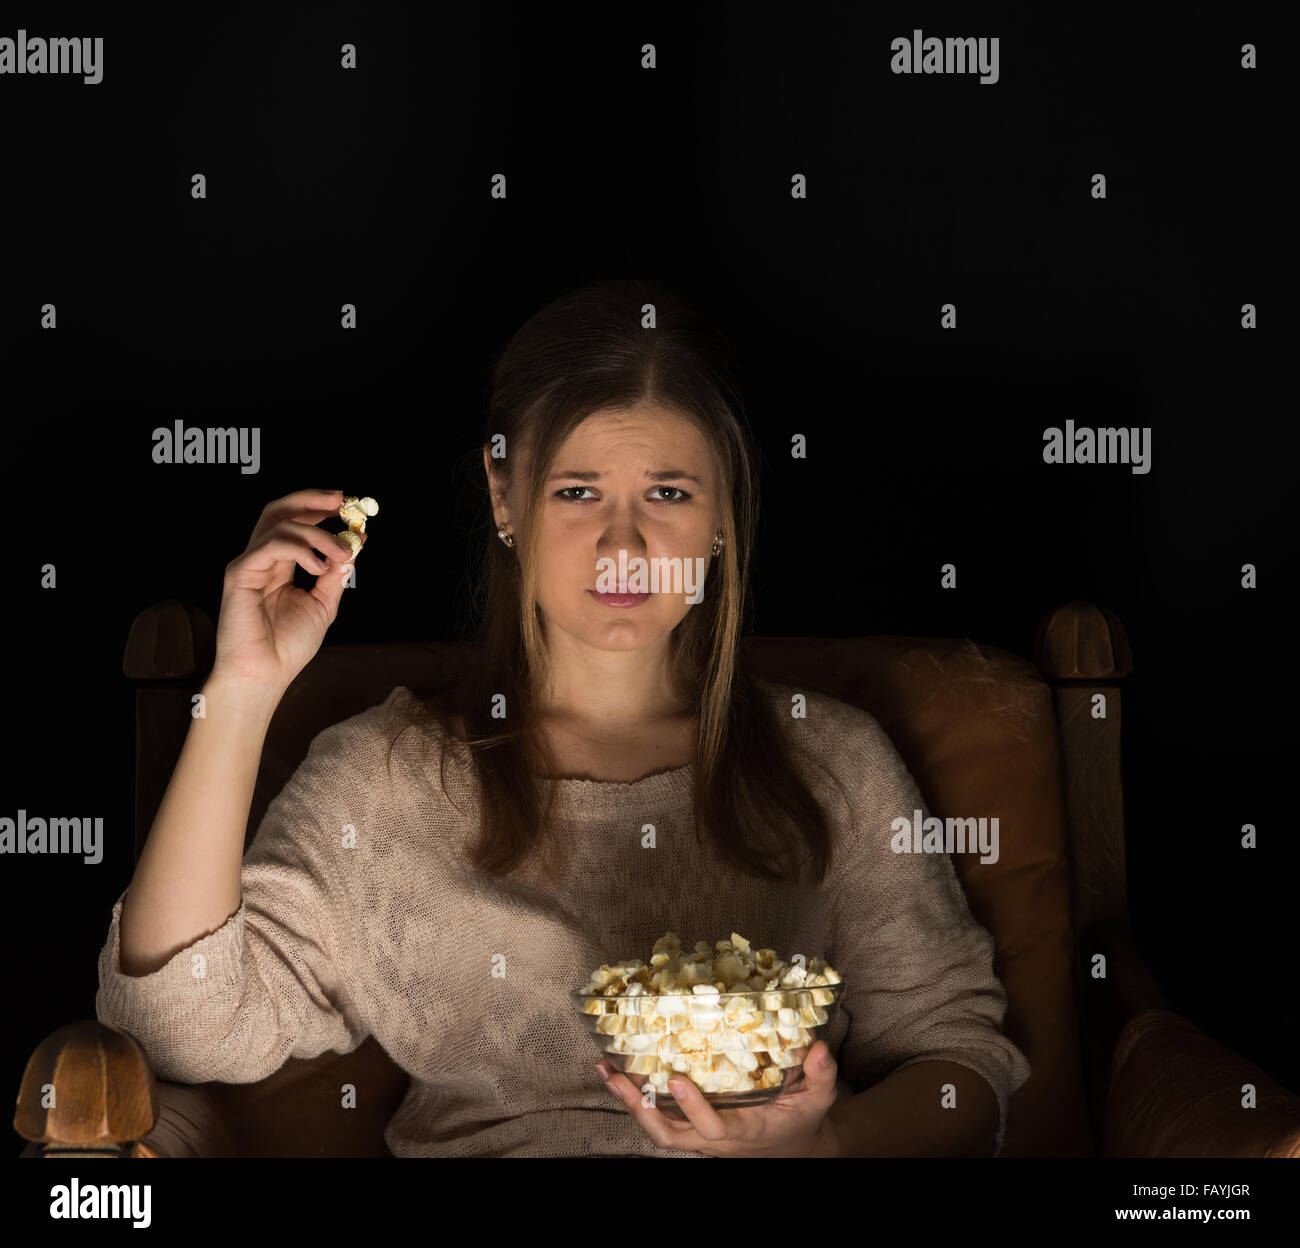 young  woman, sitting in the dark room in the front of tv watching movie and eating popcorn, showing emotions. Stock Photo